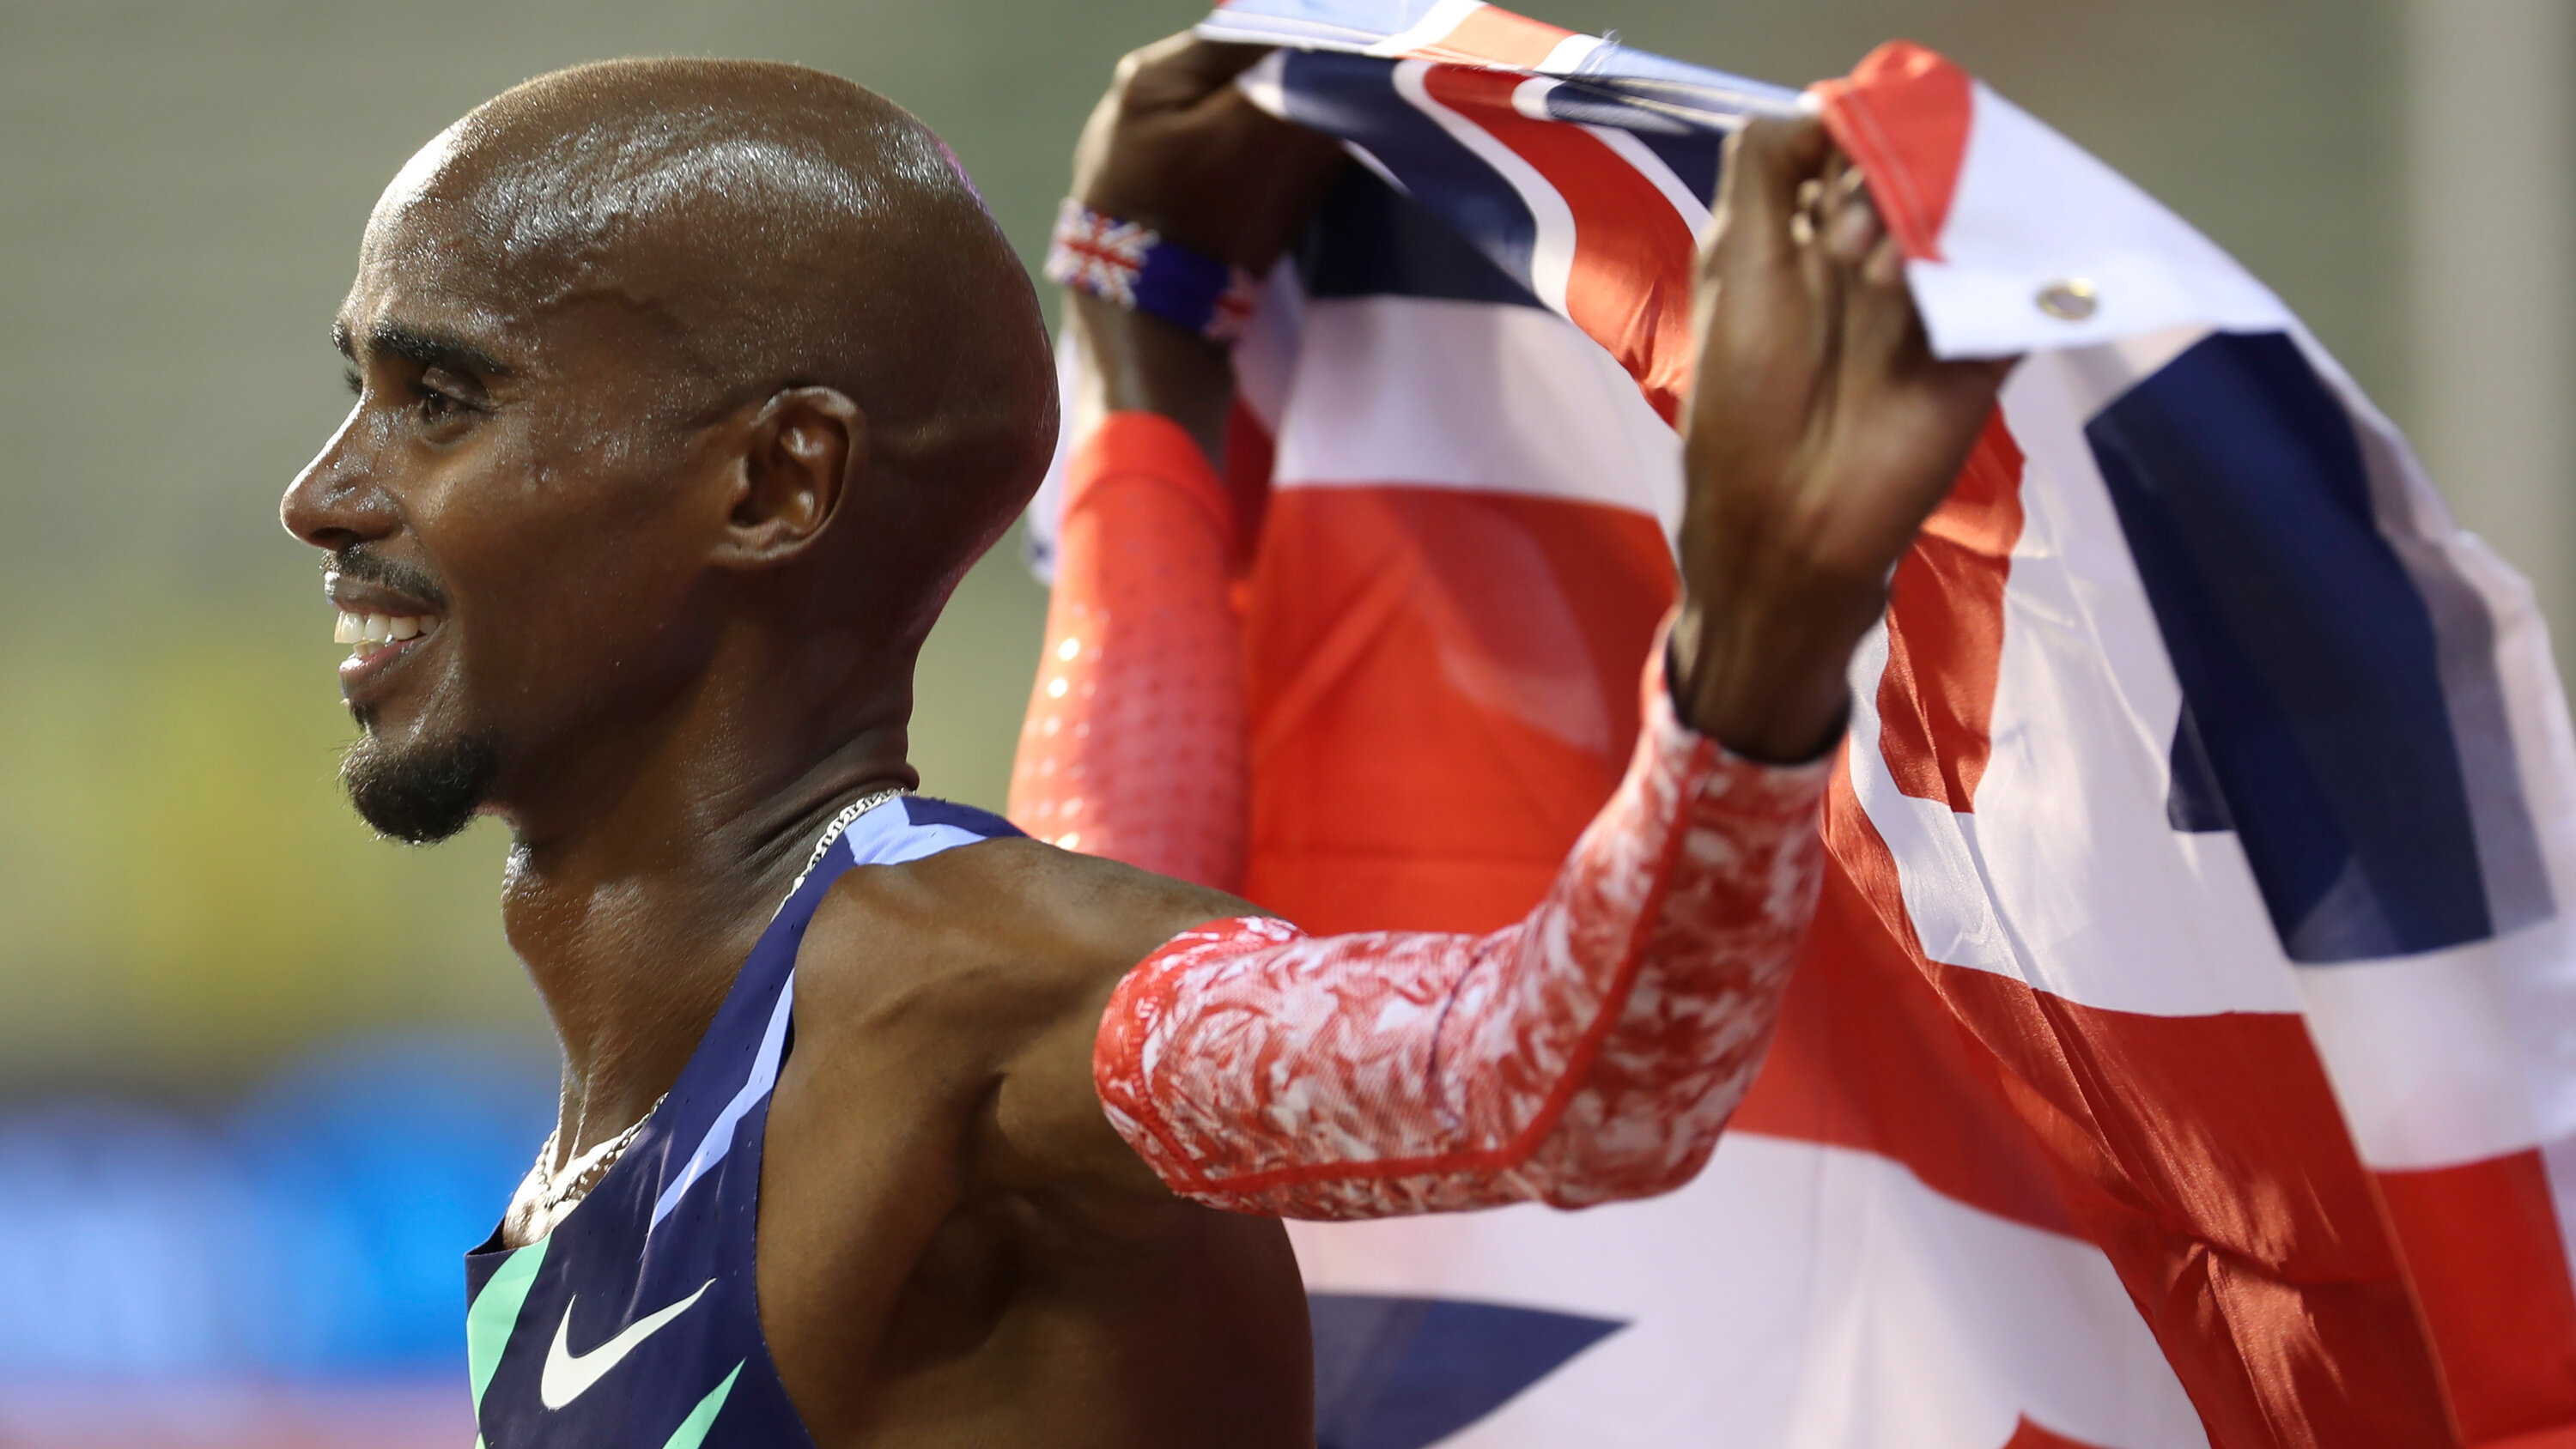 Mo Farah holding the UK's flag - Emminent Immigrants in the UK